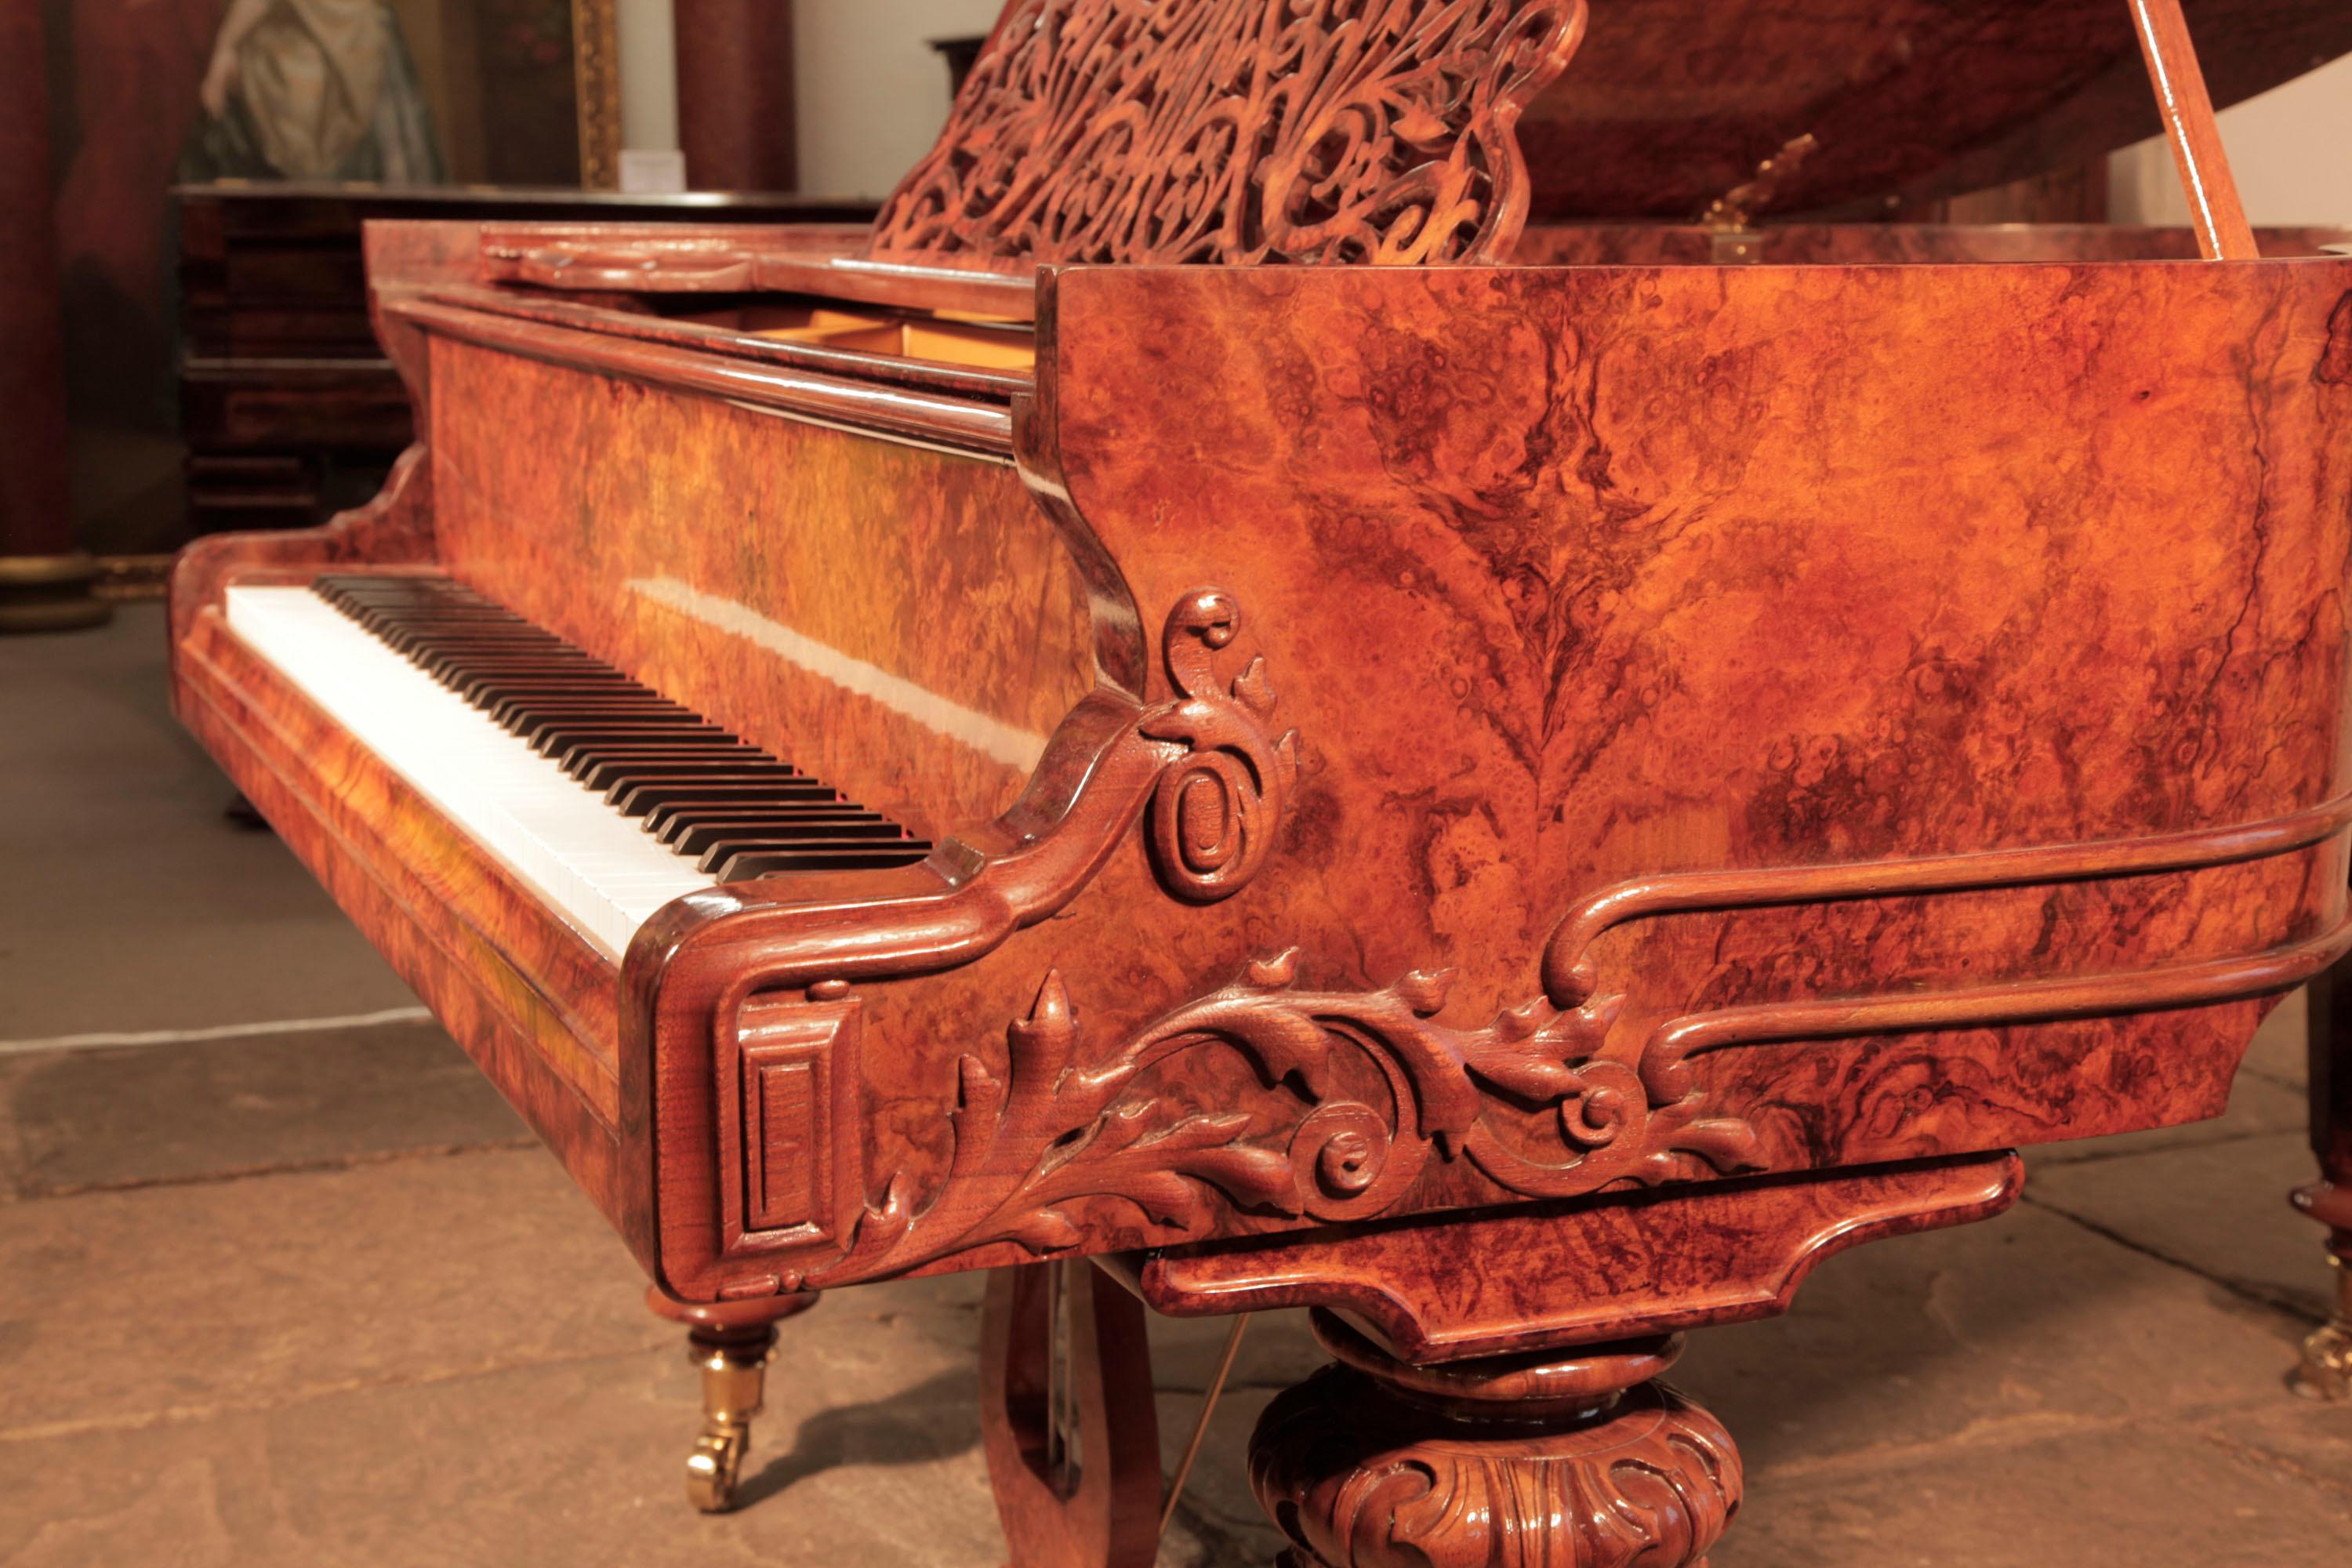 Schiedmayer grand piano with a french polished, burr walnut cabinet. The burr walnut is figured creating rippled patterns in the veneer reminiscent of oil on water.
The serpentine piano cheek features carvings of scrolling foliage, spirals and a